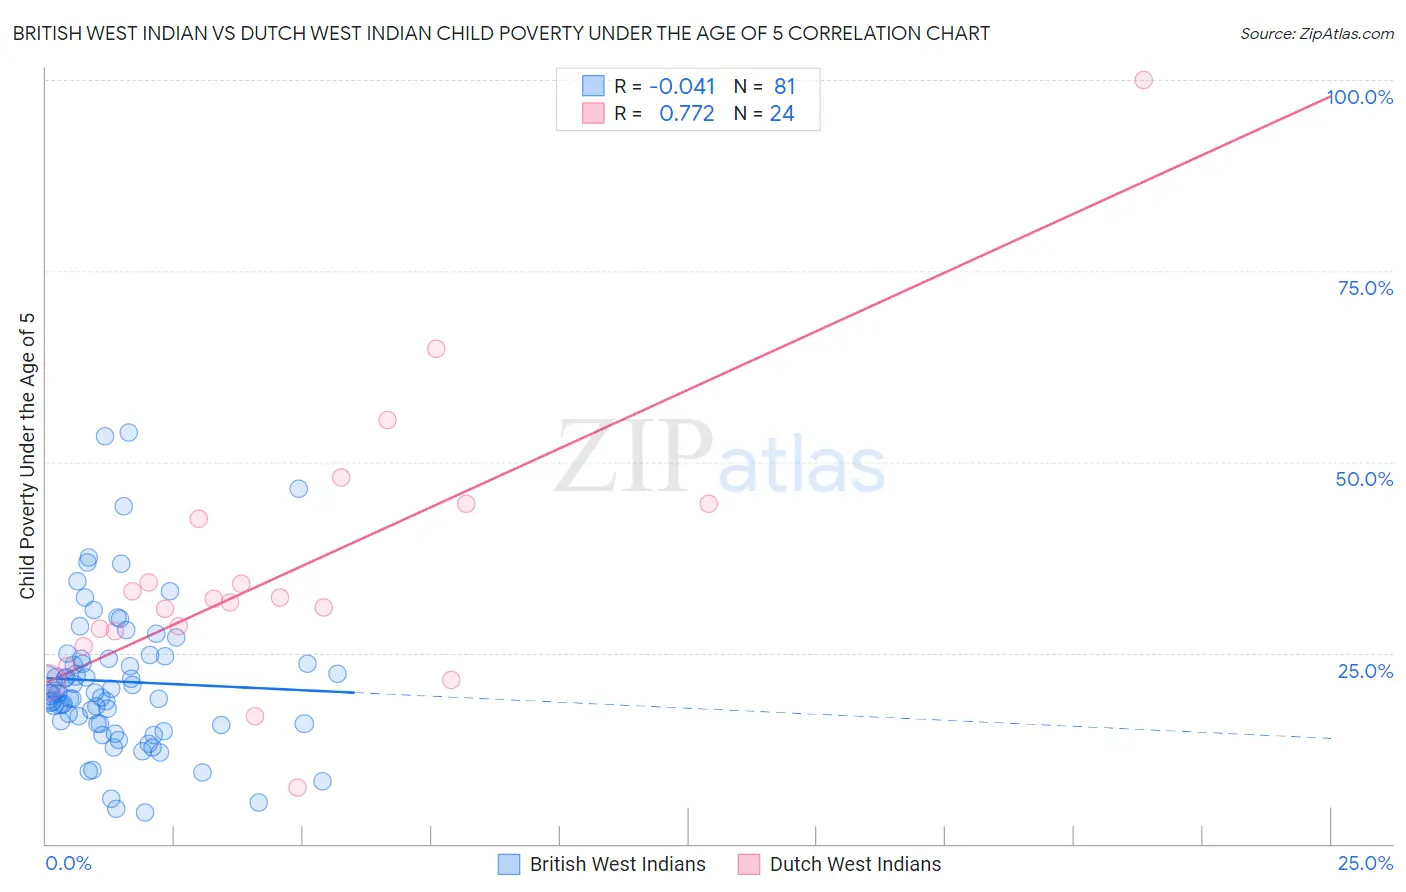 British West Indian vs Dutch West Indian Child Poverty Under the Age of 5